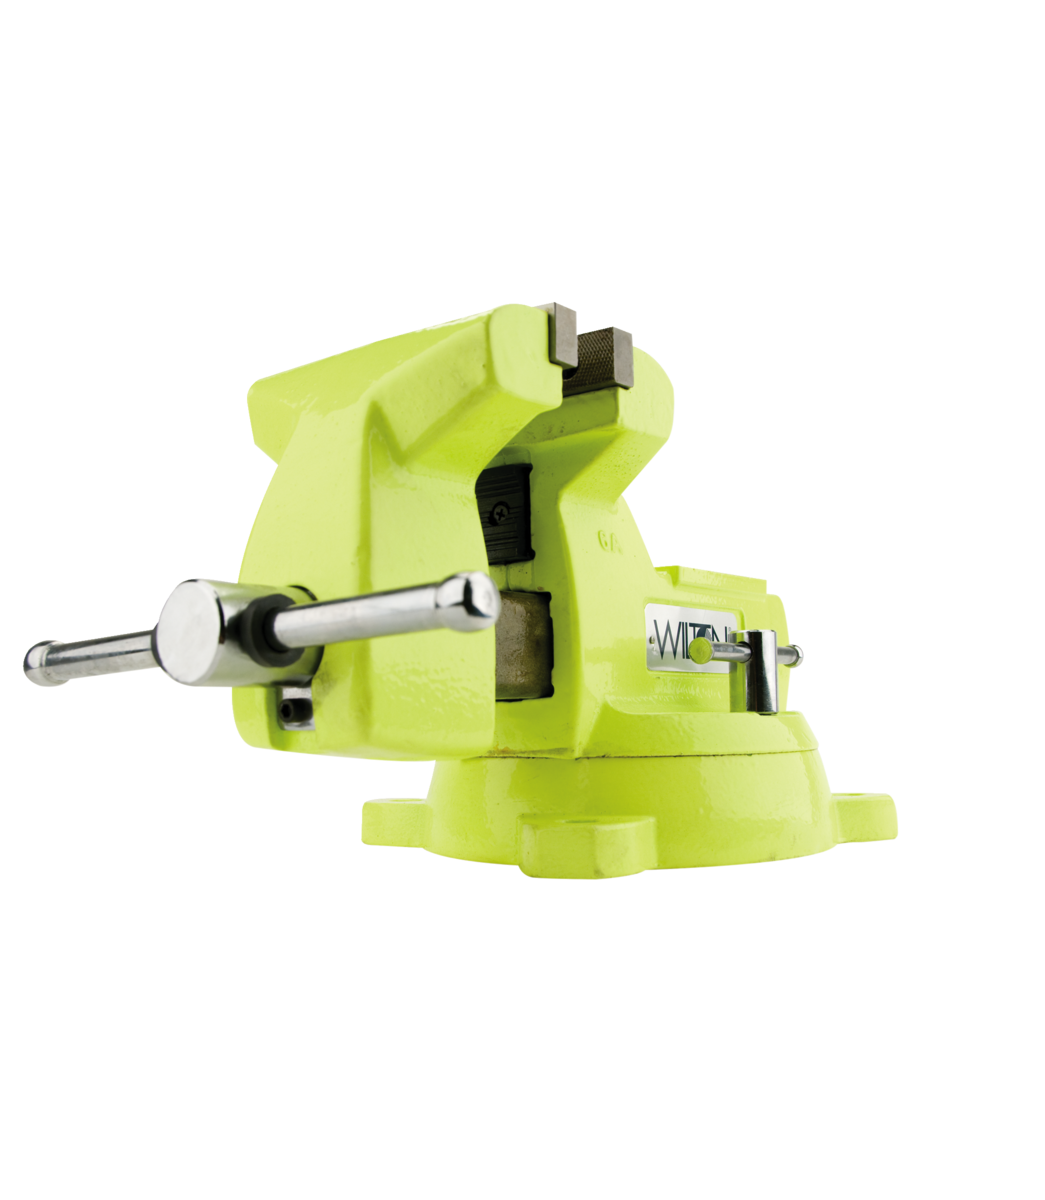 WILTON 5" High-Visibility Safety Vise